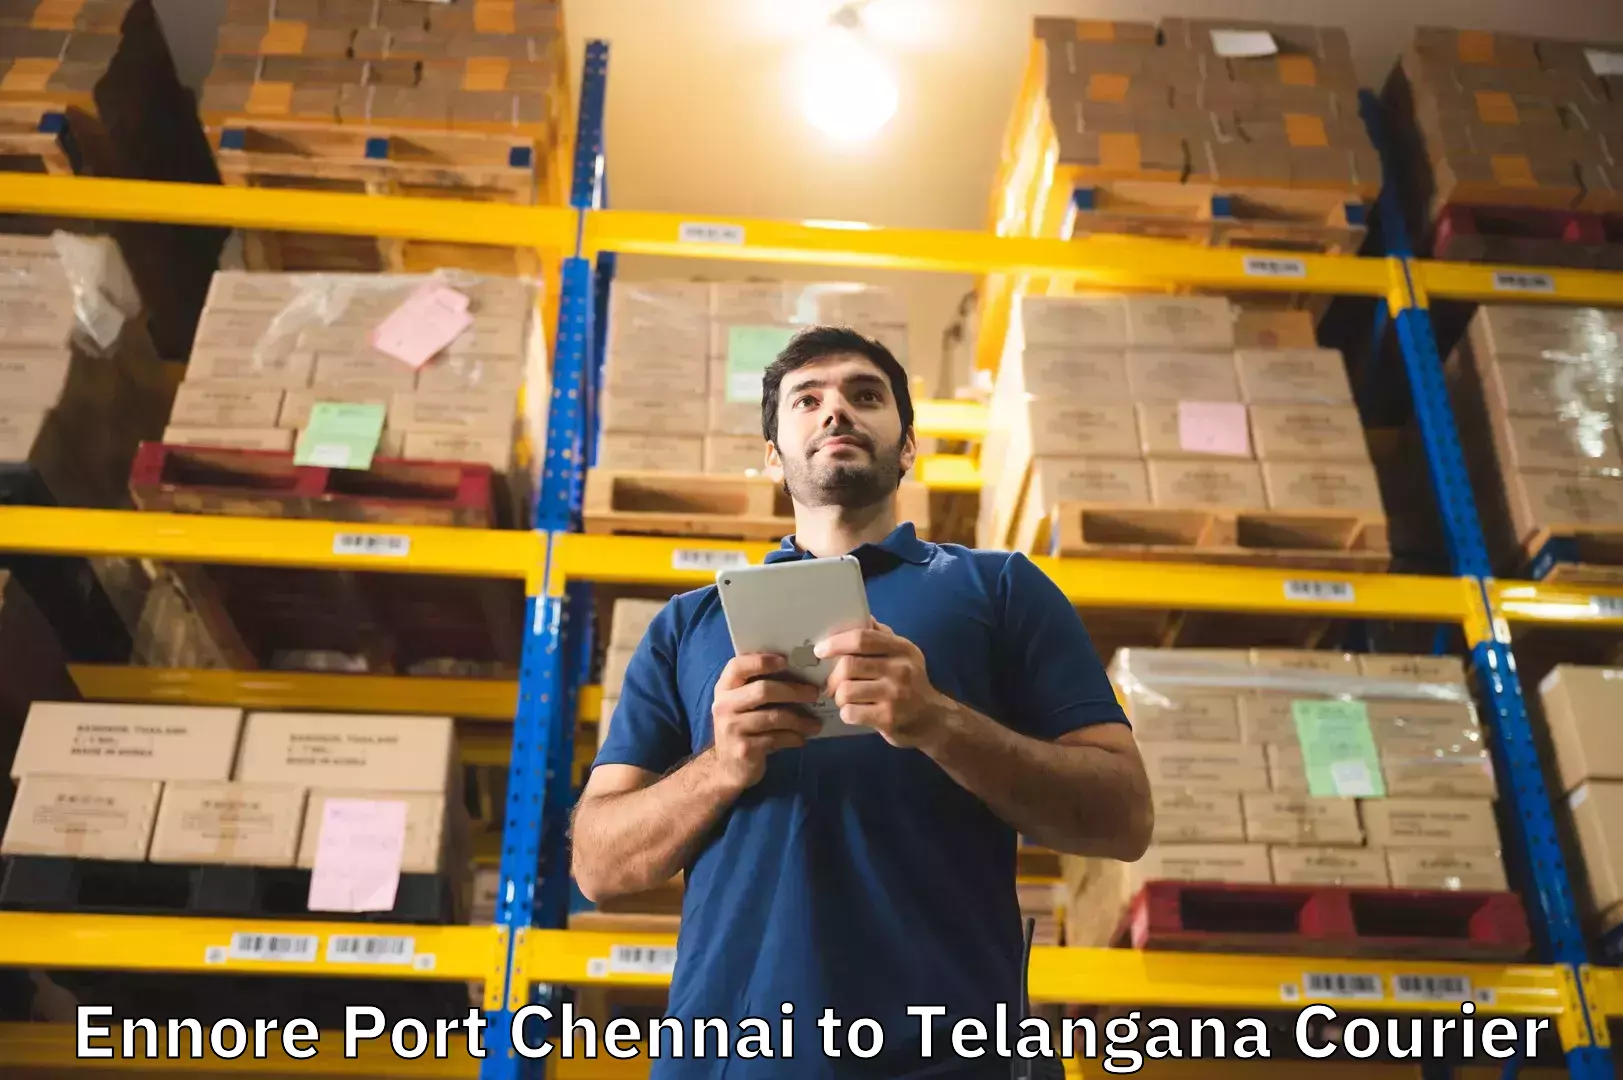 Baggage transport network Ennore Port Chennai to Kadthal